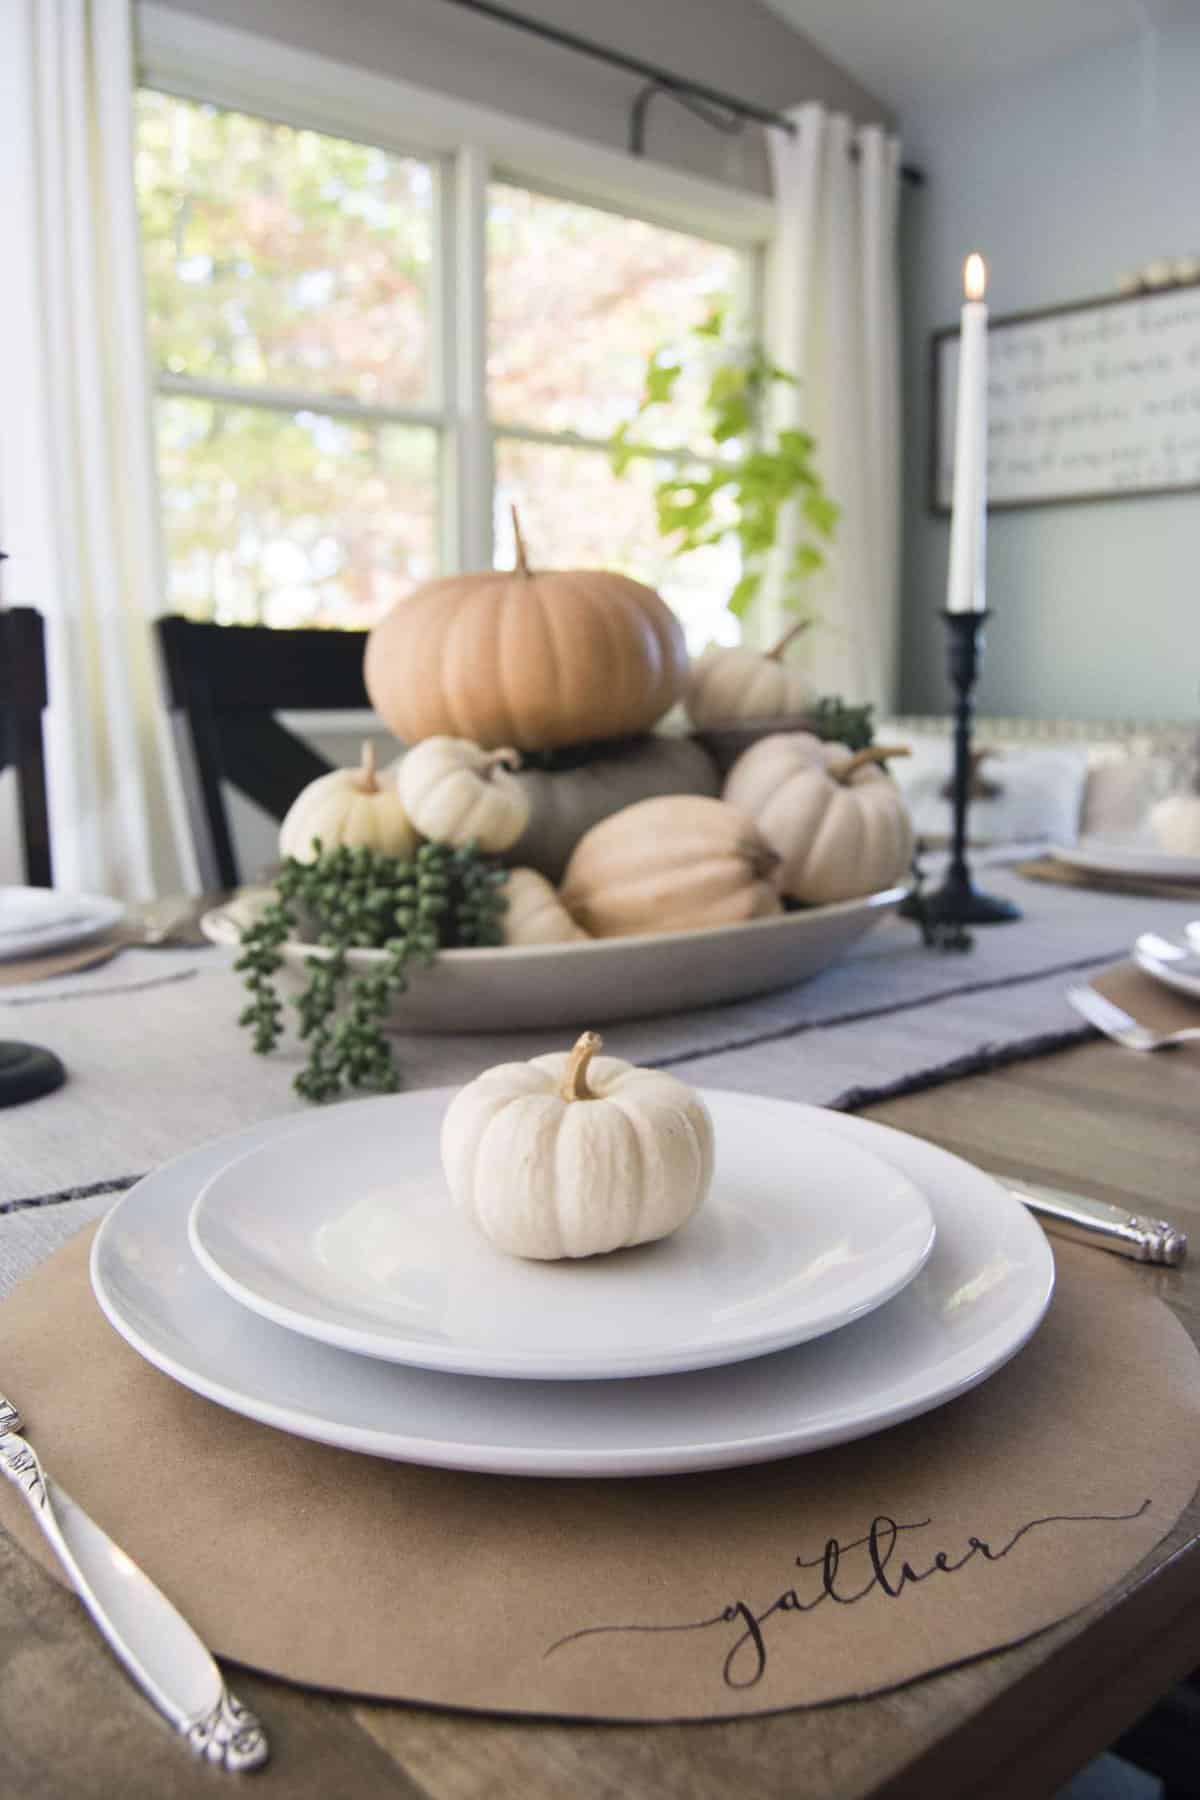 A DIY Project: Thanksgiving Chargers! Learn how to make these "Gather" thanksgiving table setting chargers in 20 minutes and for less than $4.